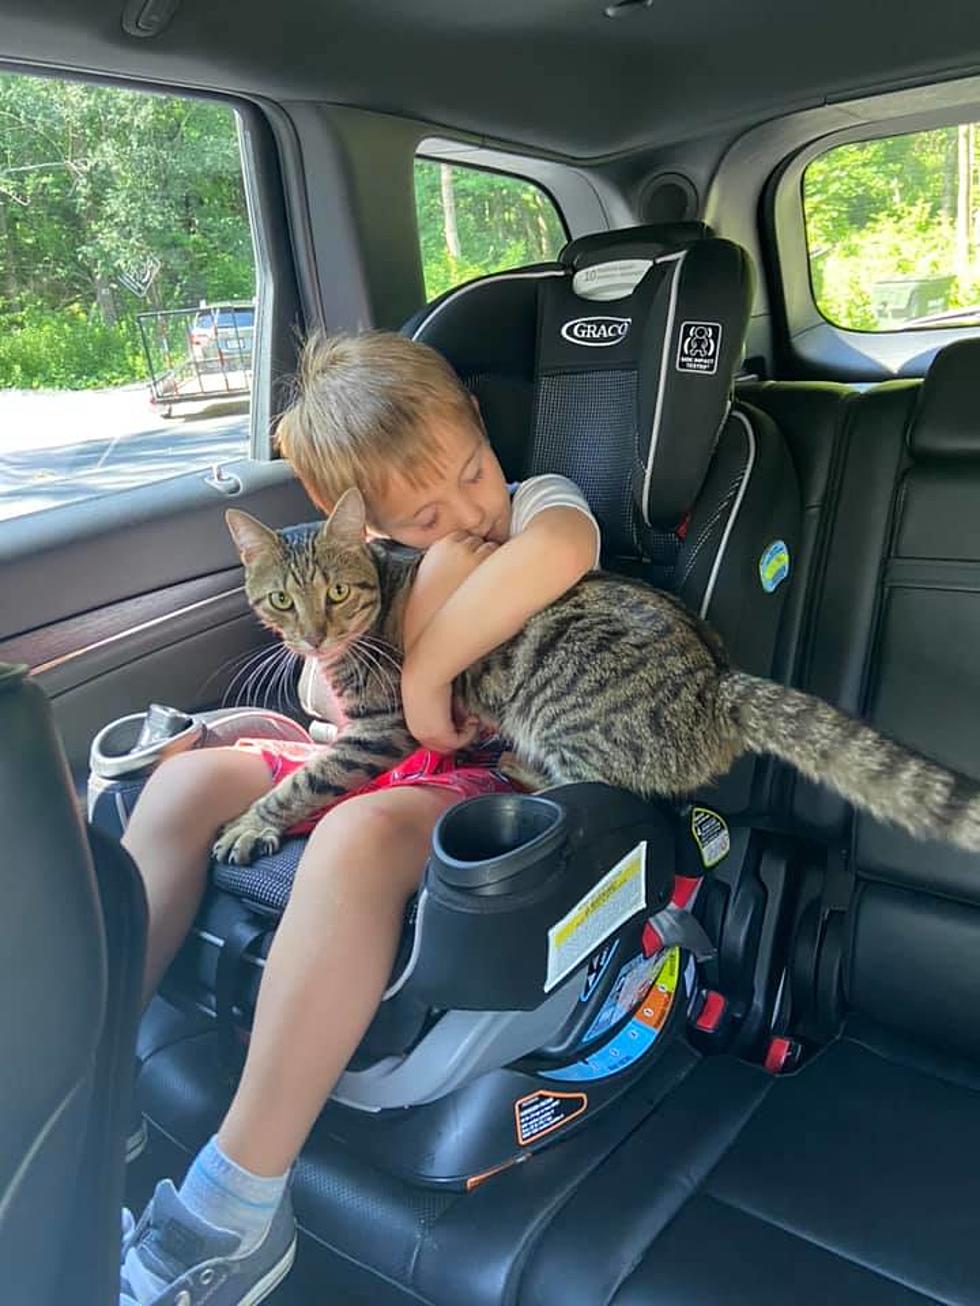 Pittsfield Family Reunited with Missing Cat After Two Months